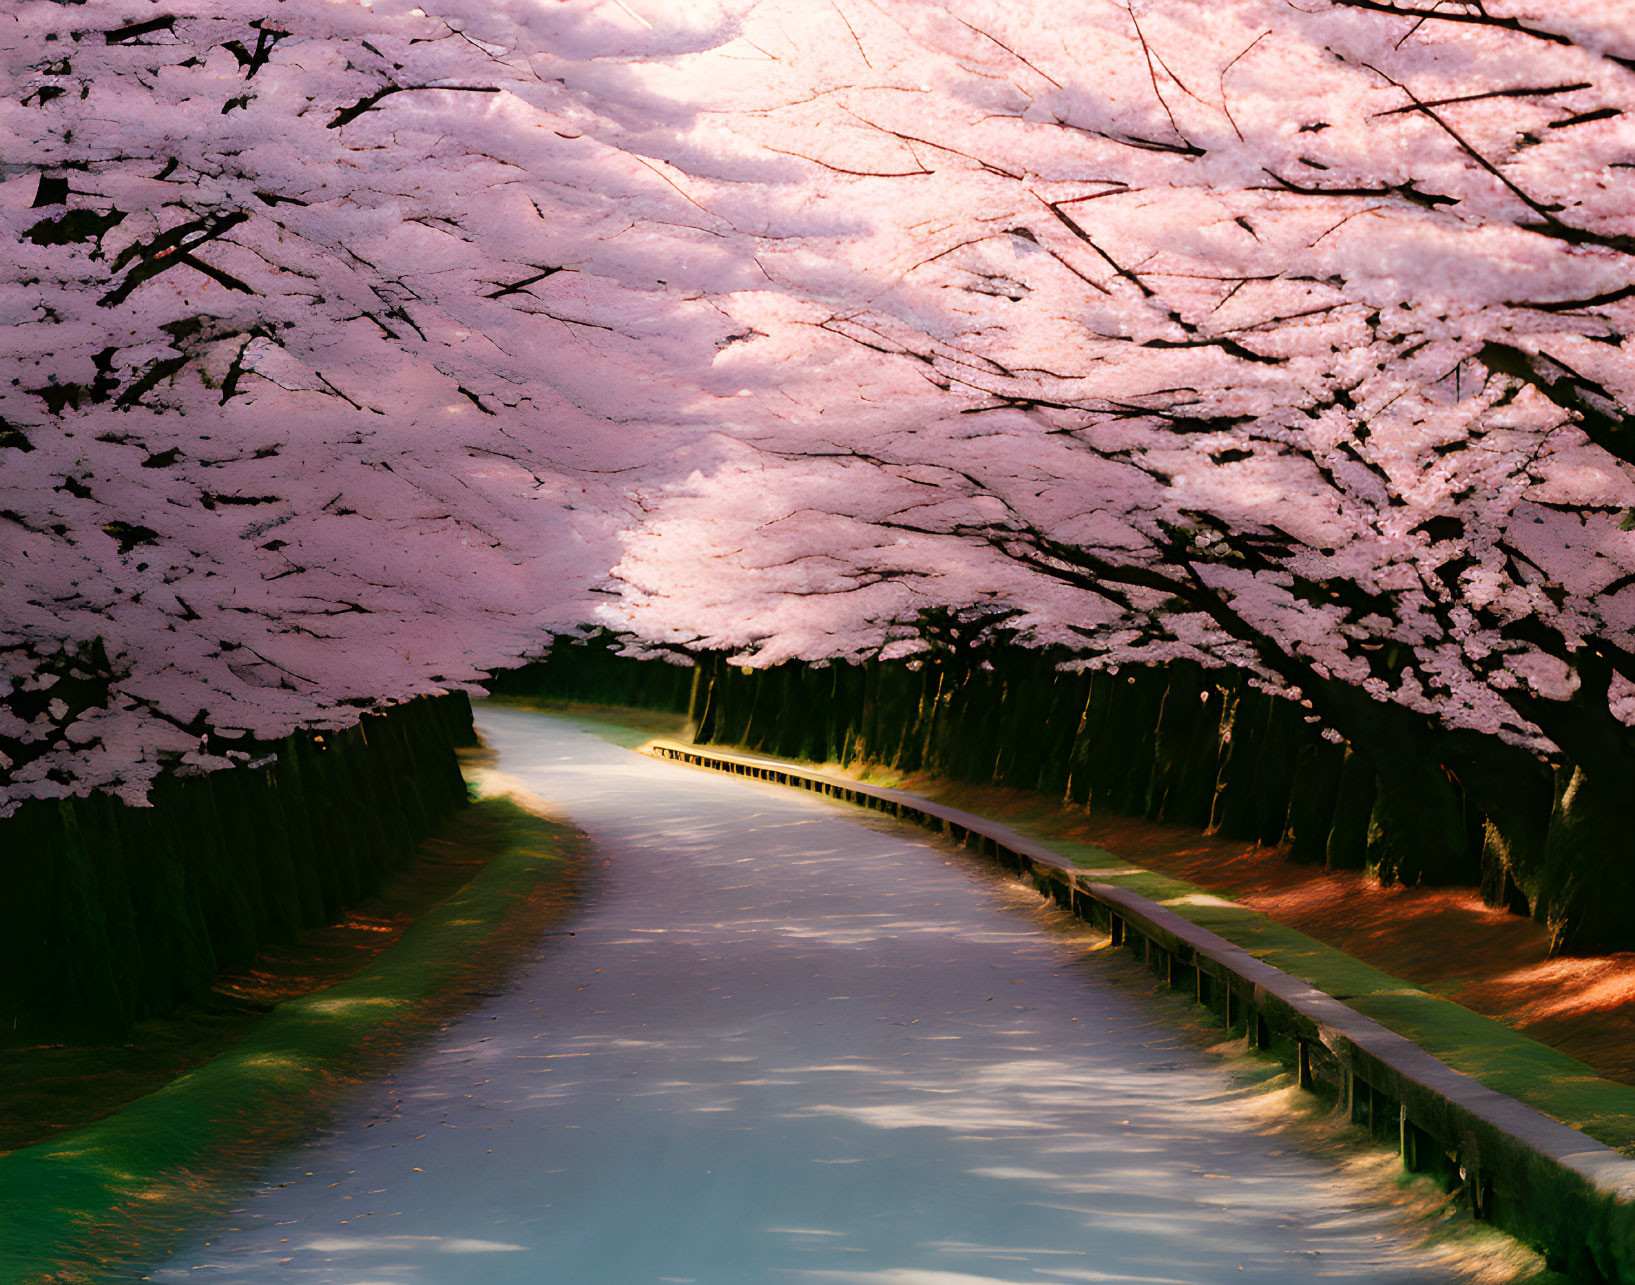 Tranquil Water Canal with Pink Cherry Blossoms in Full Bloom